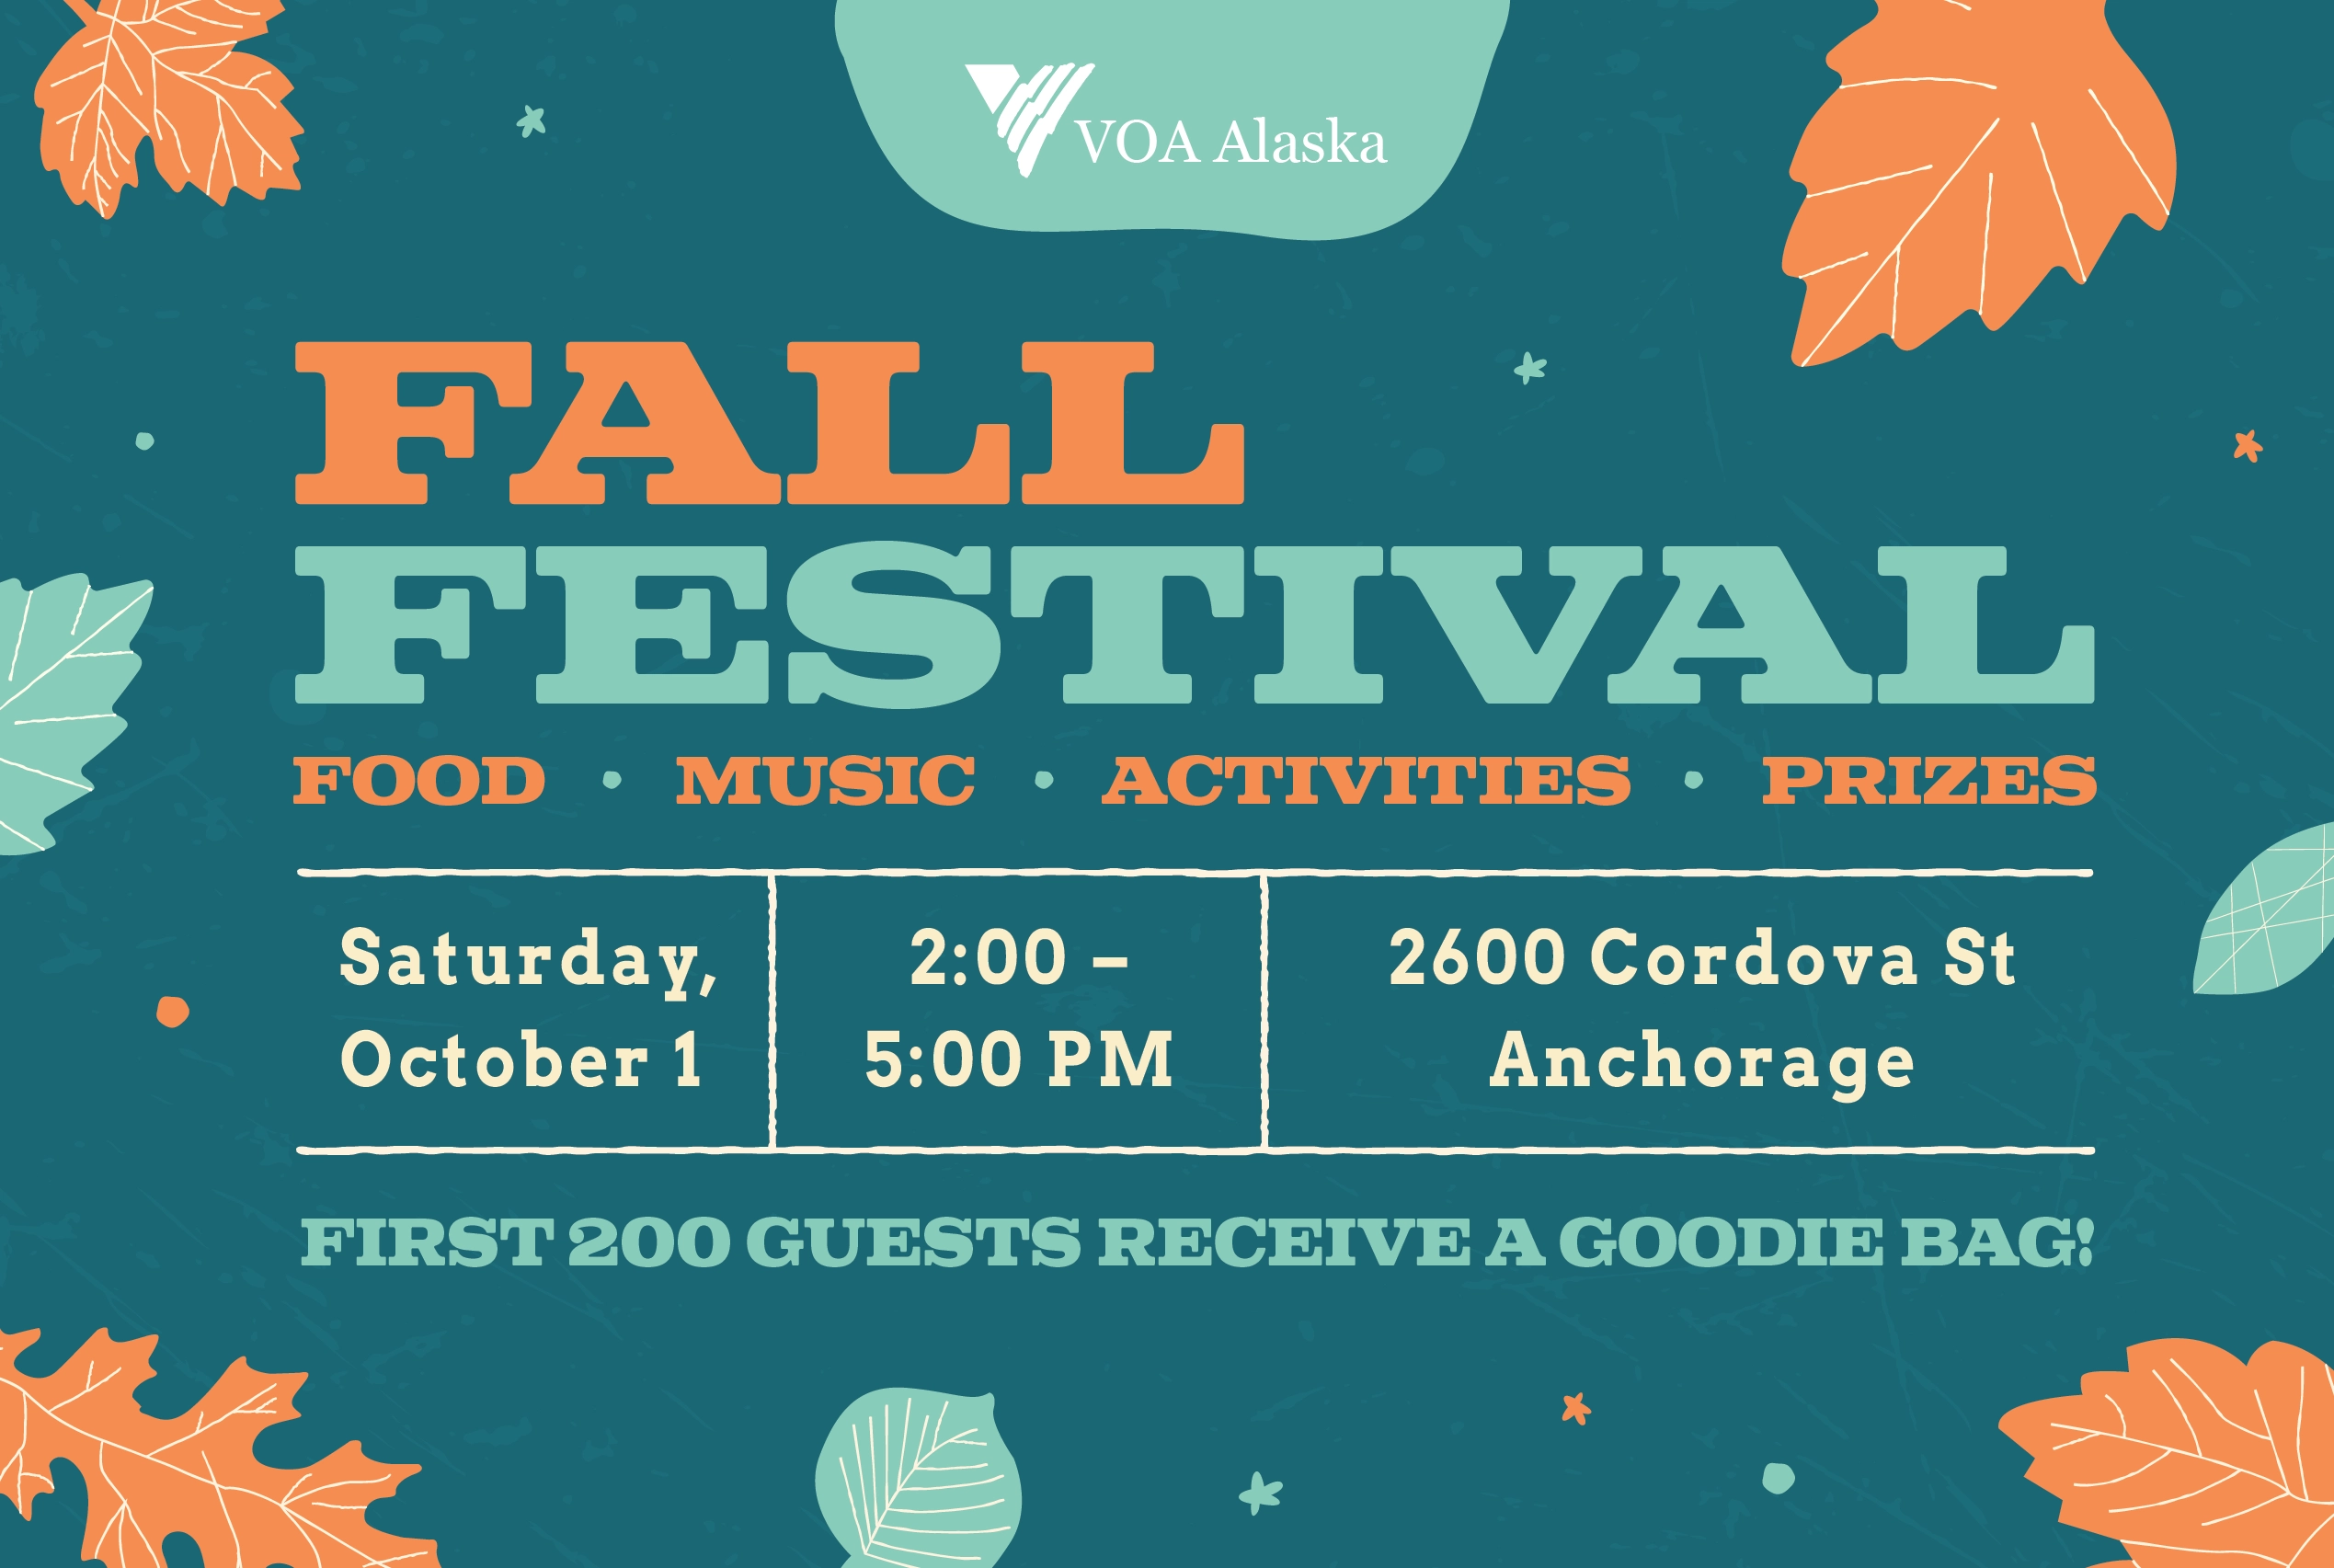 Fall festival event flyer for family friendly event in Anchorage, Alaska